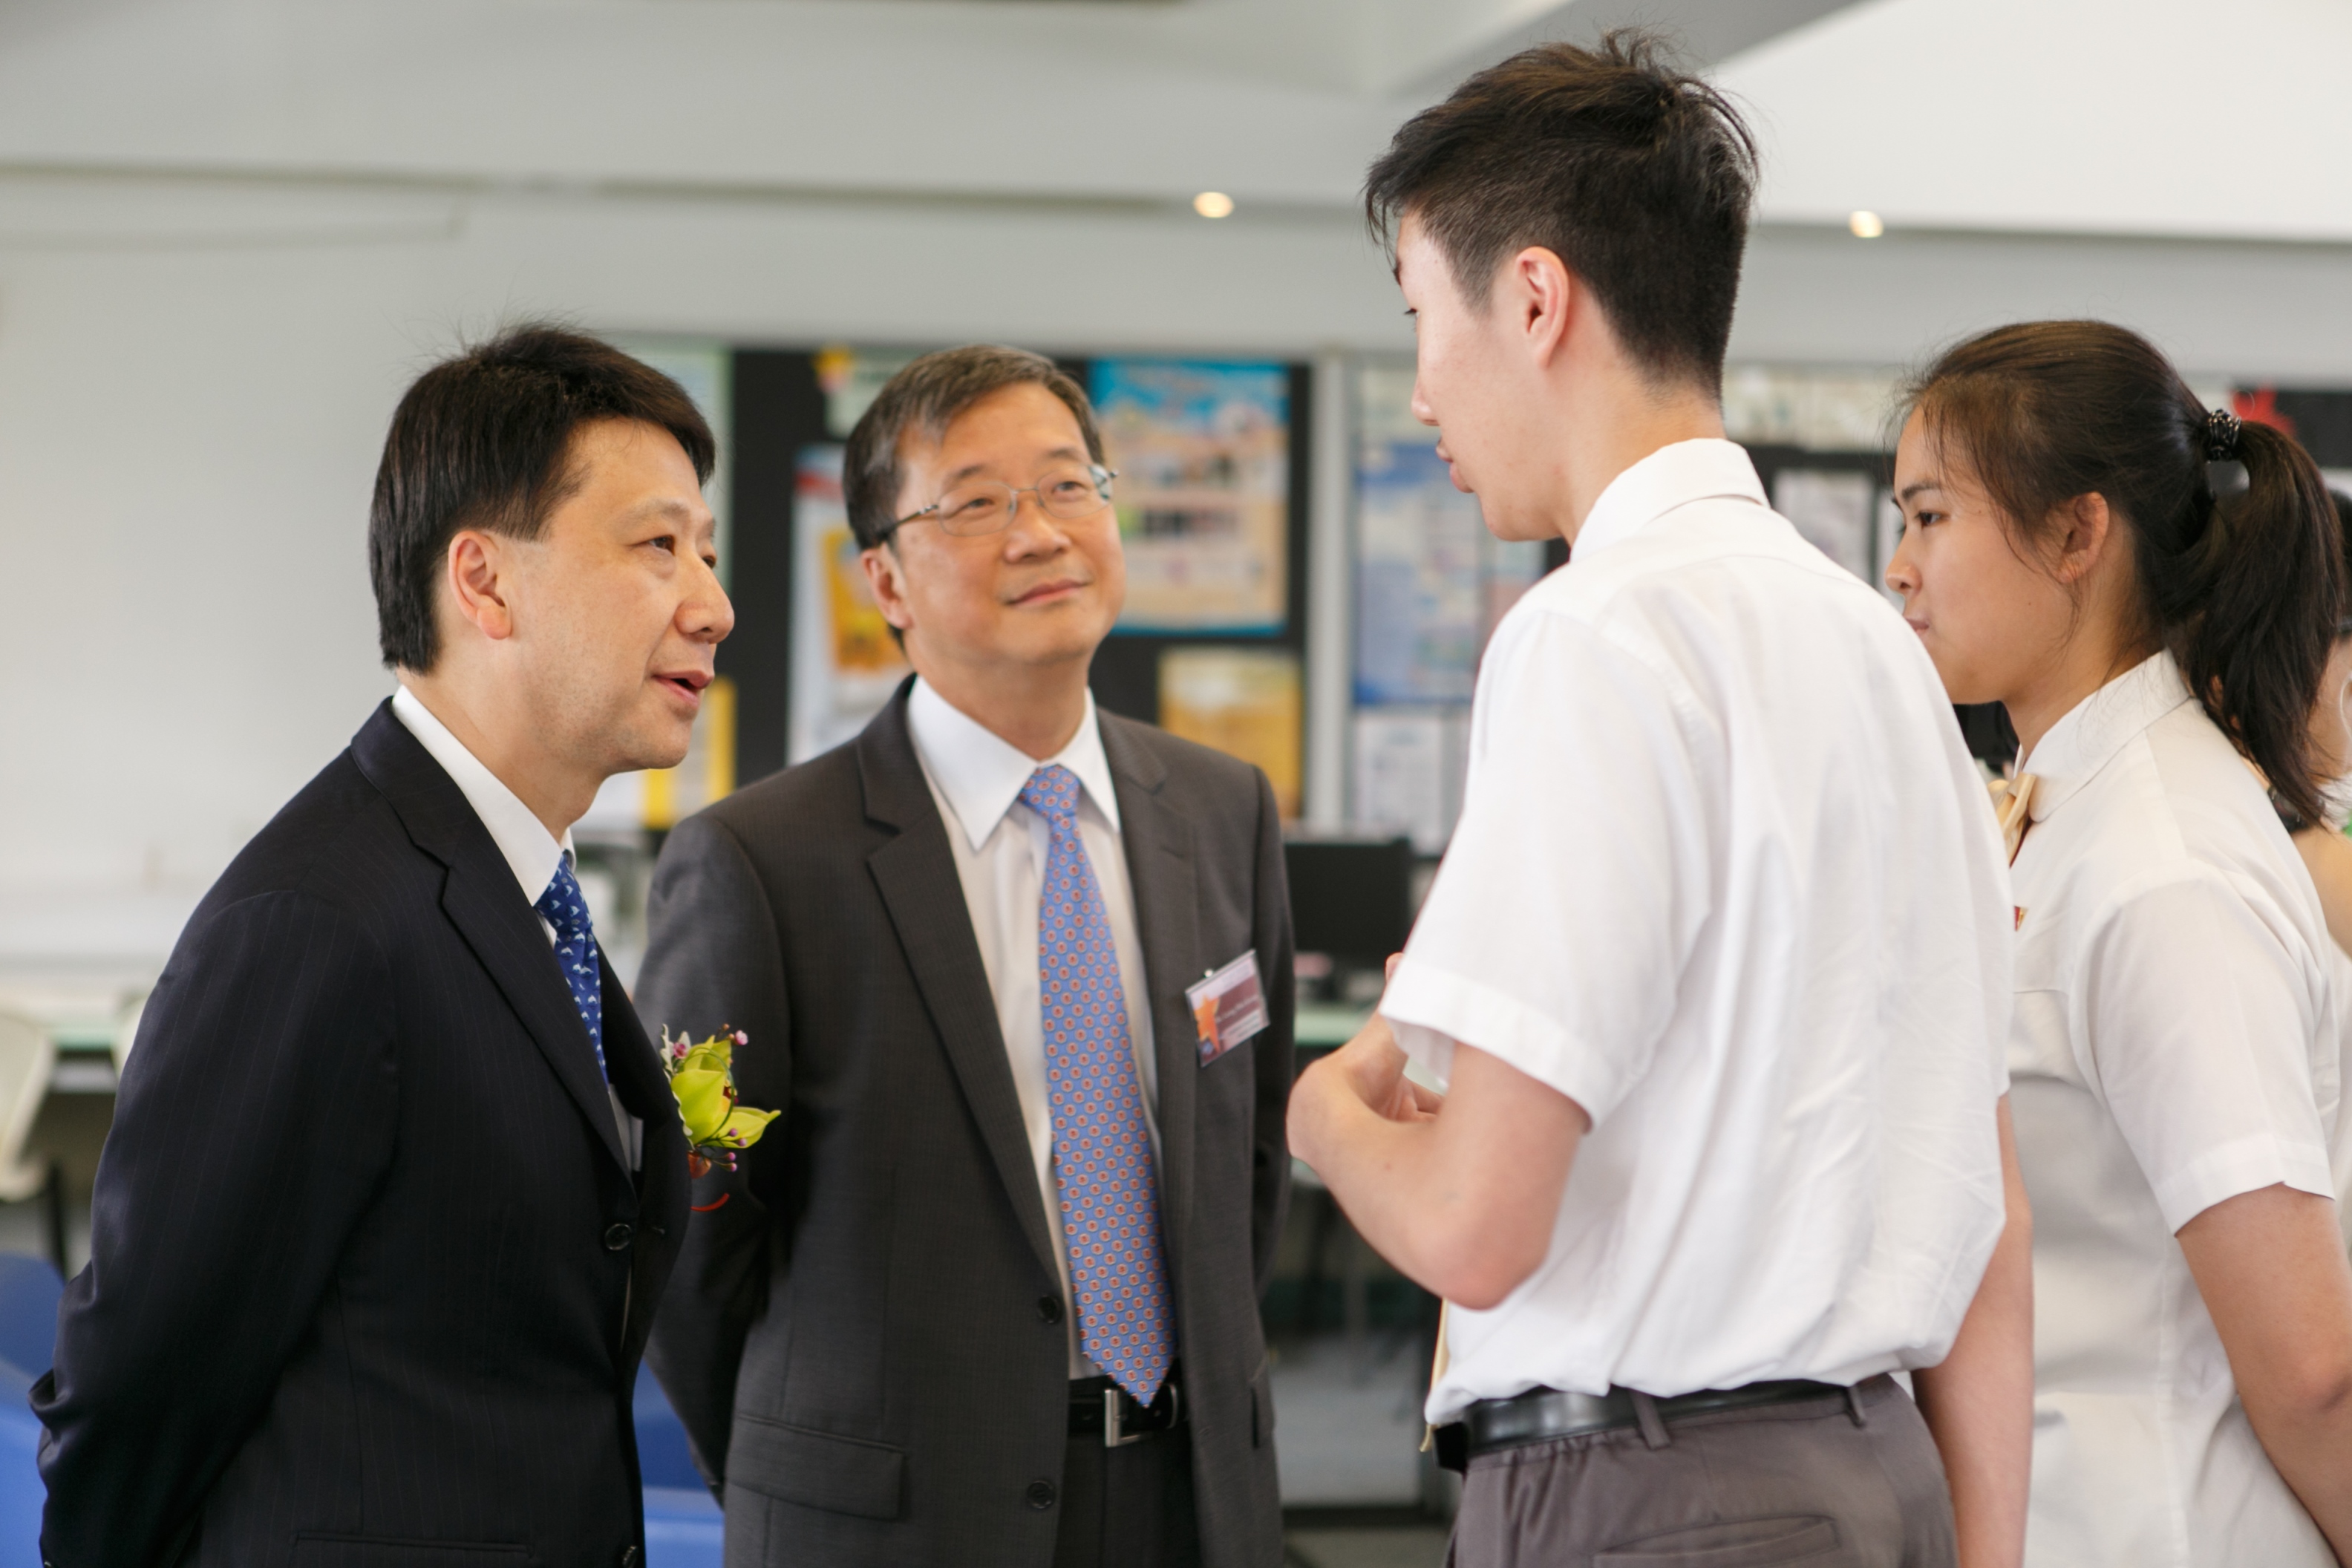 Mr. Pang Yiu Kai, SBS, JP (on the left) talking with students.